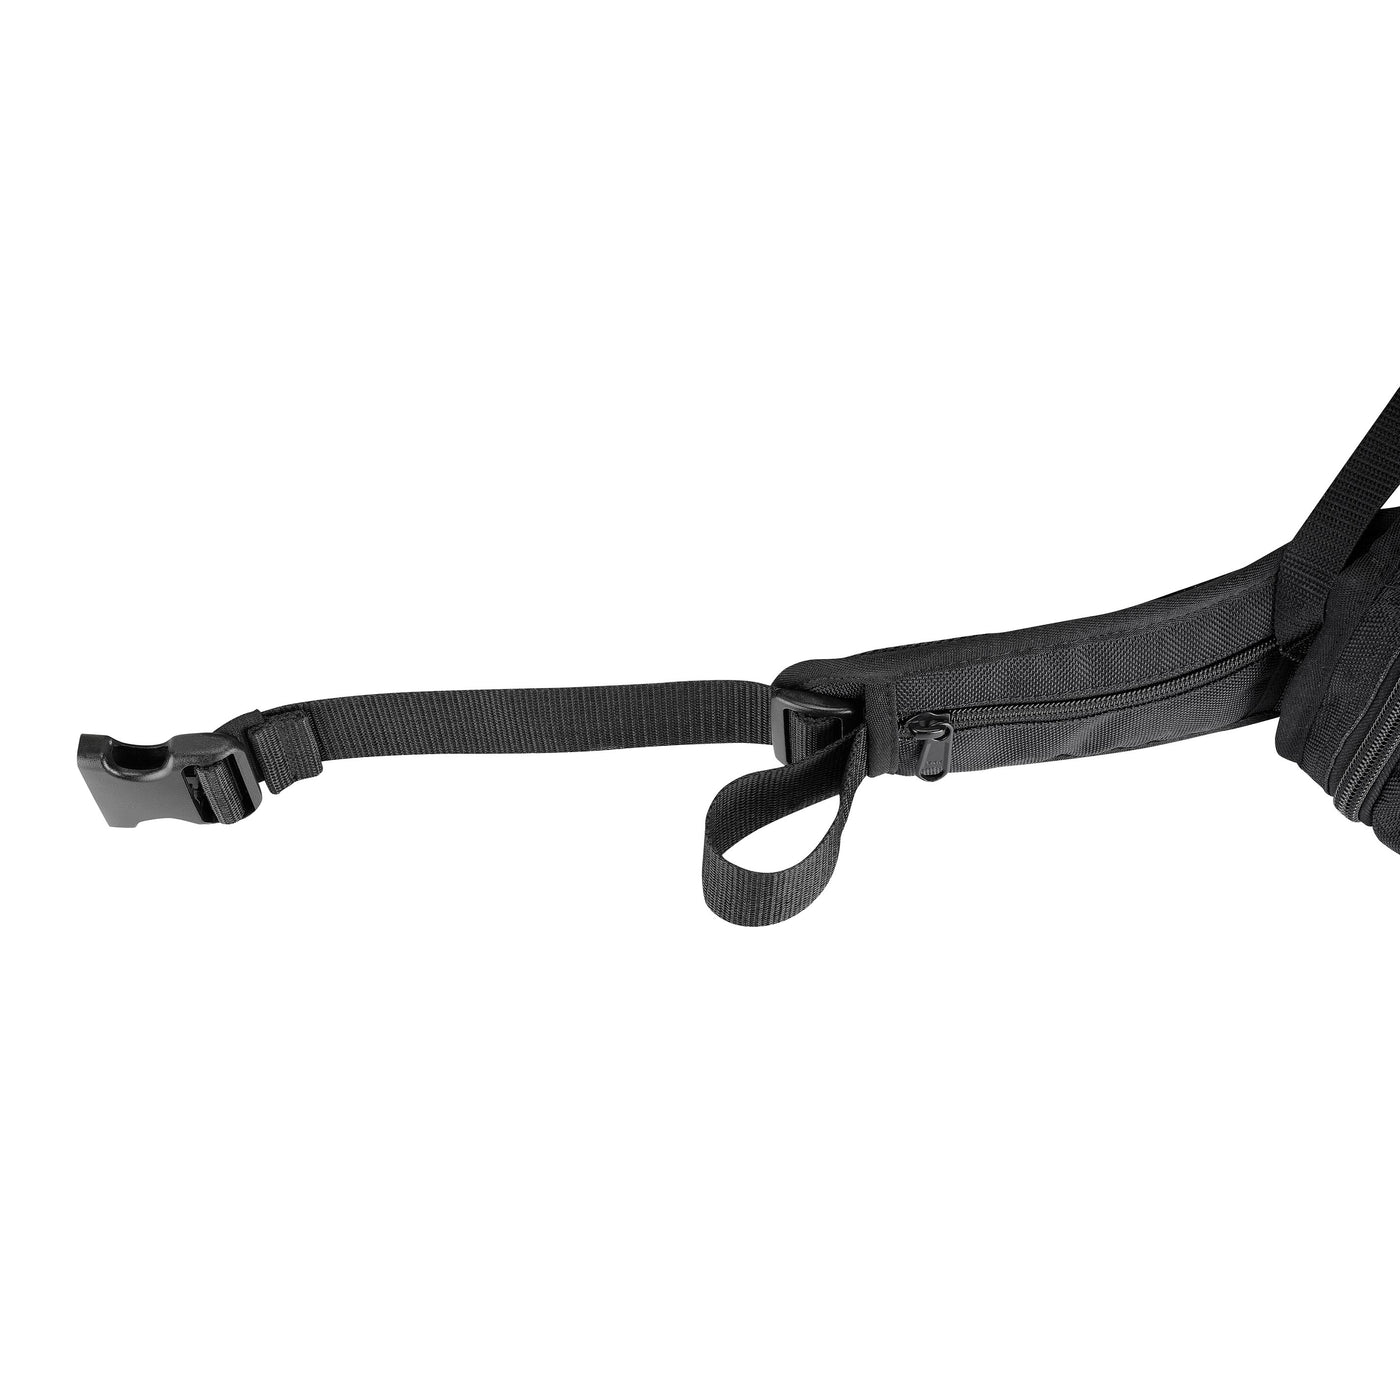 Clydesdale Gear Enduro Pack - view of the waist straps extra length tucking into the pocket designed for it on the belt.